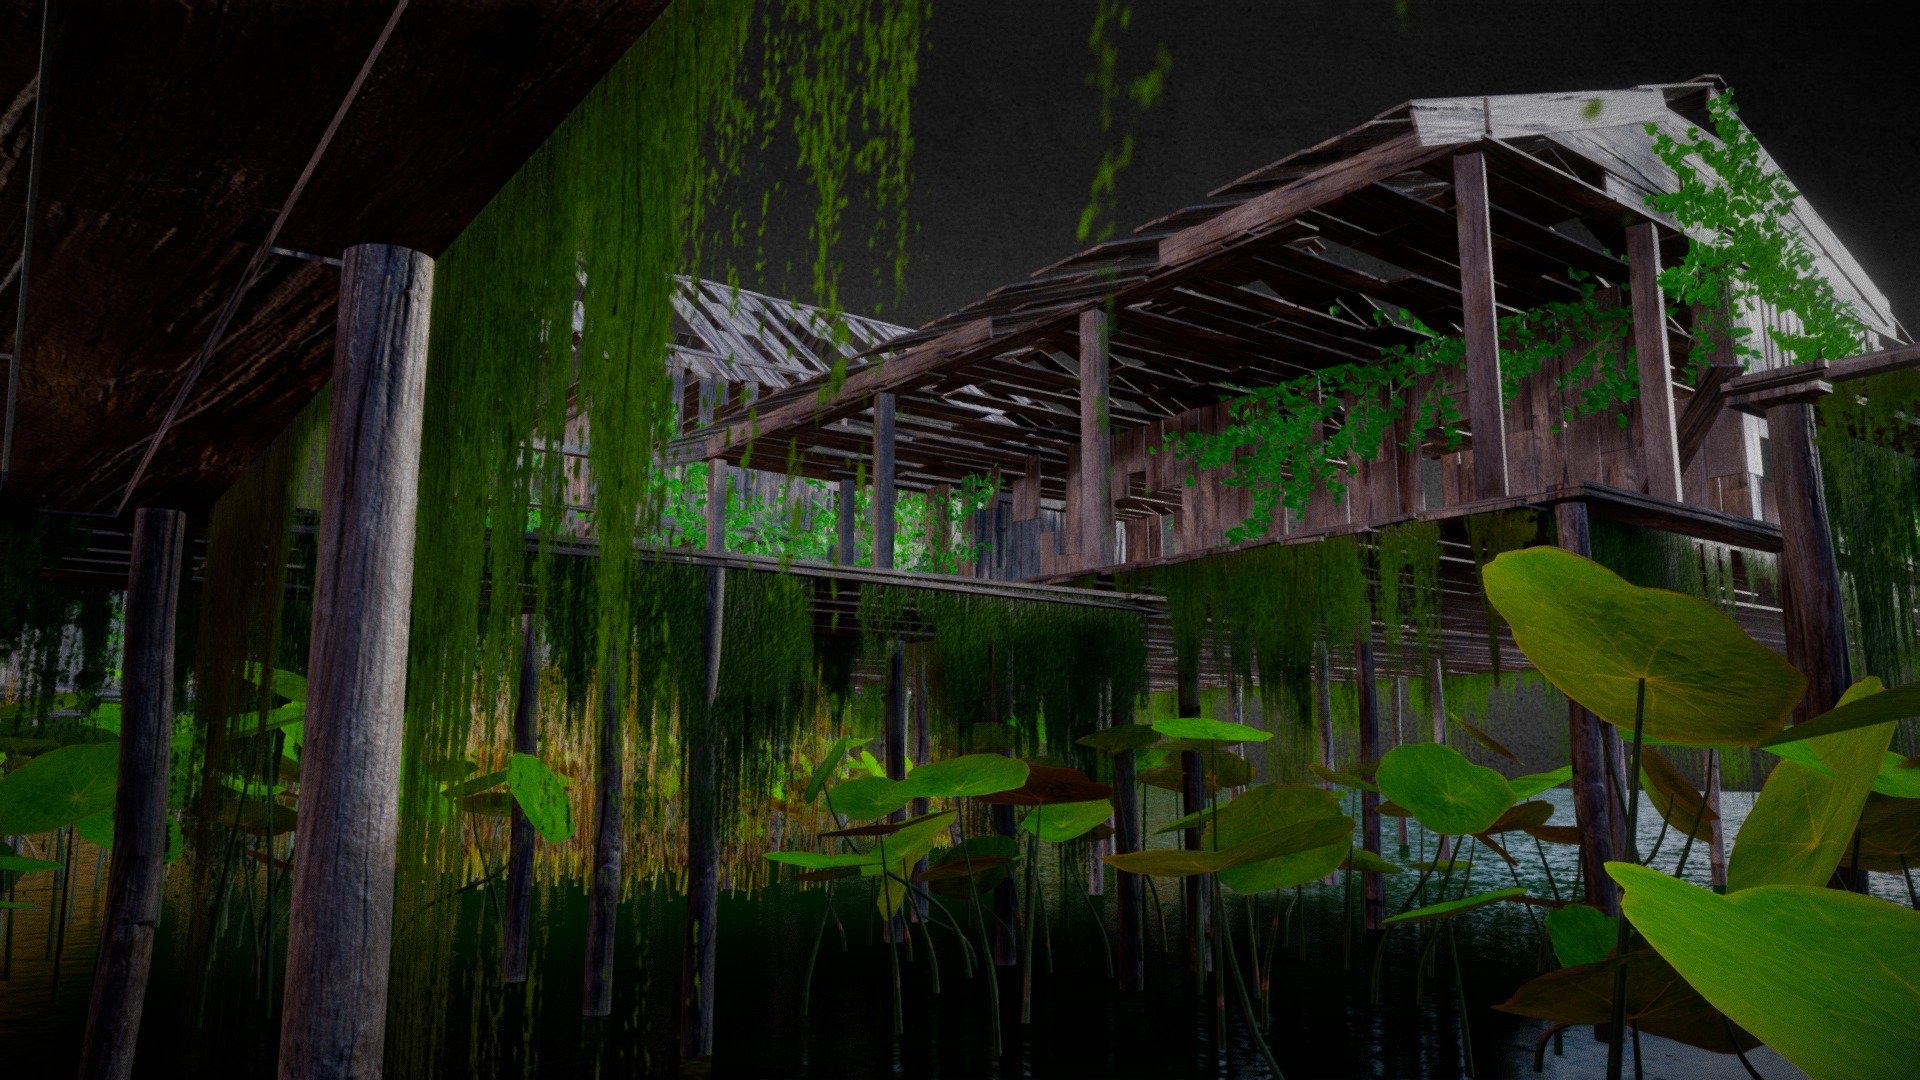 Wooden Swamp House Destroyed Scene



Assets Included:-

5 types of wooden house with Ivy and Algae Leakings
5 types of same wooden house destroyed/Abandoned
Reed grass
Swamp Plant
2 low-poly Ivy Individual stems
Destroyed/Broken Also included in the Pack


Things you can do with this asset pack:

Translate,Rotate and Scale the vines and use them in any assets/Project you like.
Make full Swamp Scene using the assets Provided
Things are not limited just follow your imagination.
Thank You!

Additional Files Structure

Export Folder contain all the fbx model Texture folder contain all the Textures
Sketchfab Scene file
All Required Blend Files.

Software Used for Creating:

Blender
Substance Painter
Photoshop
pureRef



Additional Notes:

Use subsurface scattering in shader editor for leaves and leaking.
All the House meshes are made up of individual planks which are seperated you can add and remove them according to your requirements.

Thank You! - Abandon Wooden Swamp House Scene - Buy Royalty Free 3D model by Nicholas-3D (@Nicholas01) 3d model